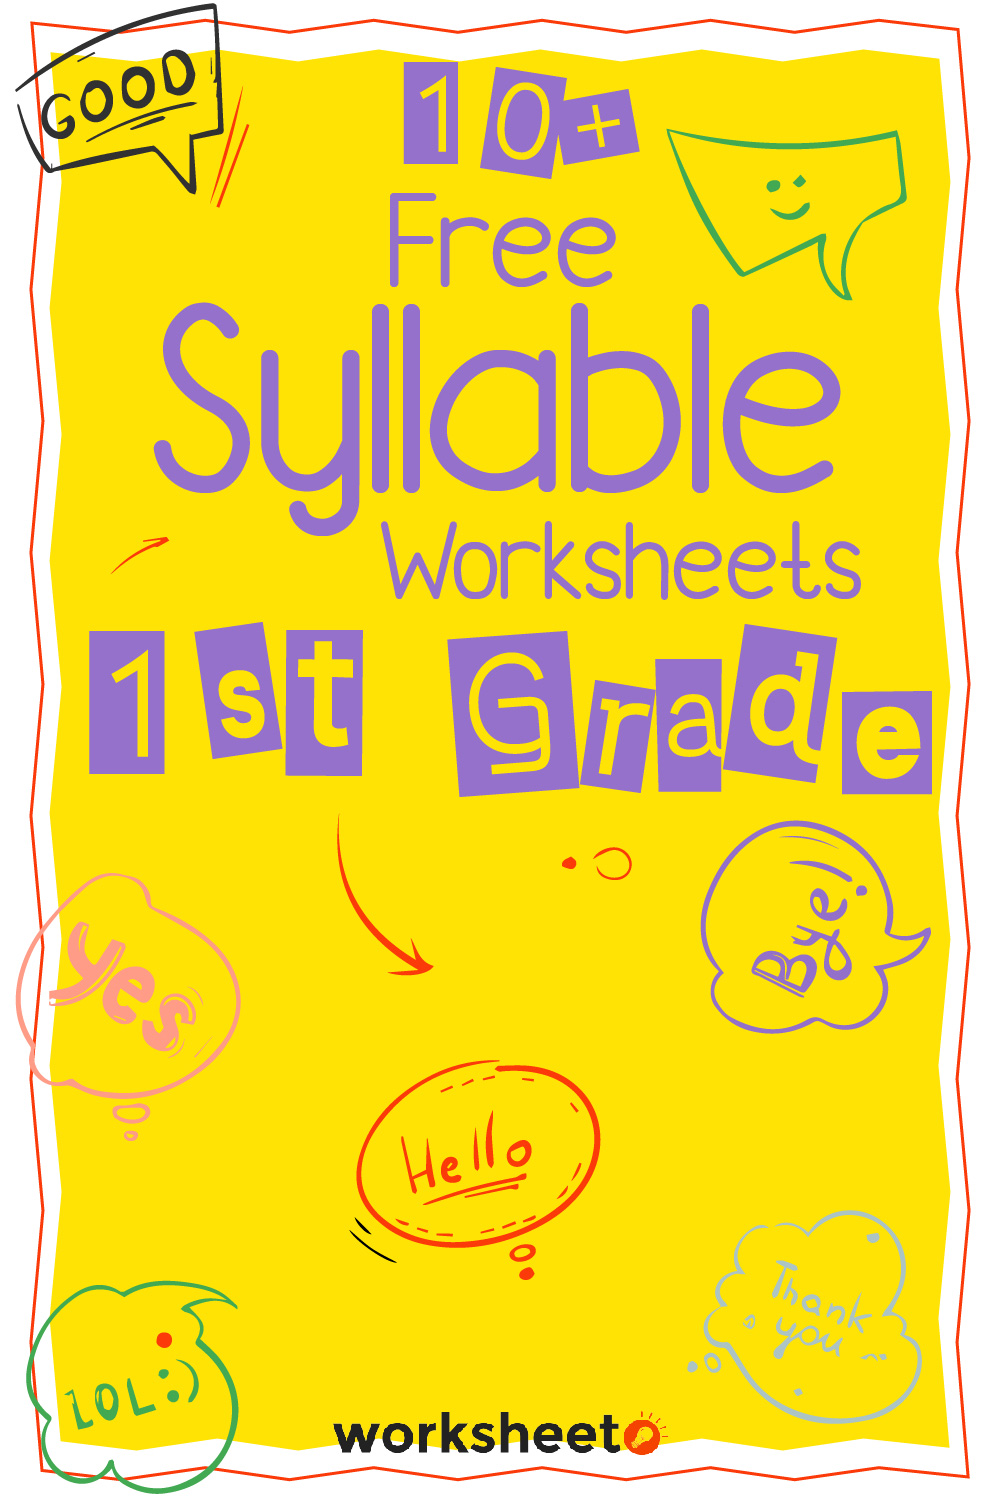 Free Syllable Worksheets 1st Grade